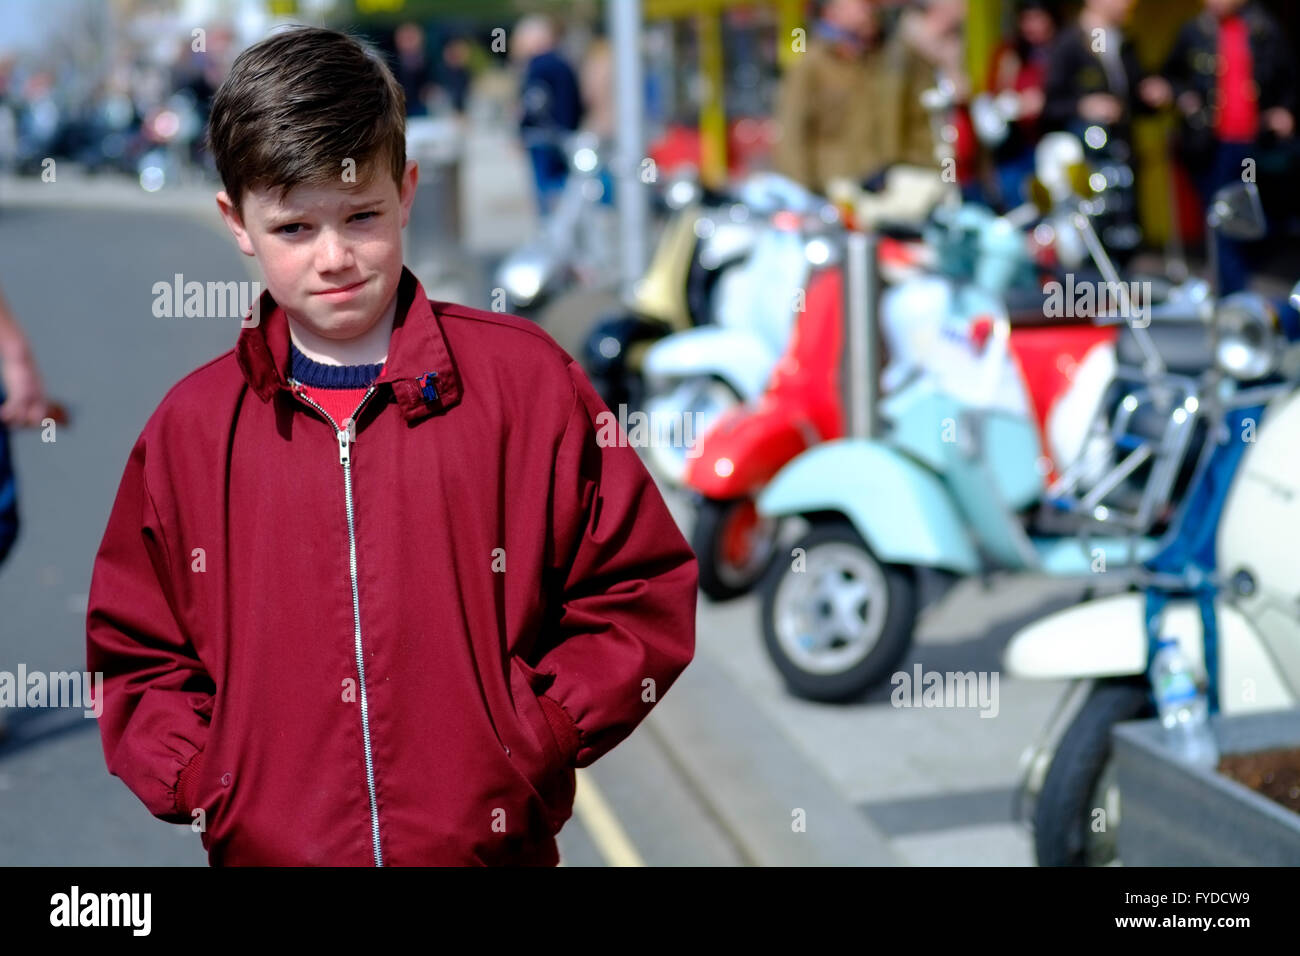 Young Mod looking cool Stock Photo